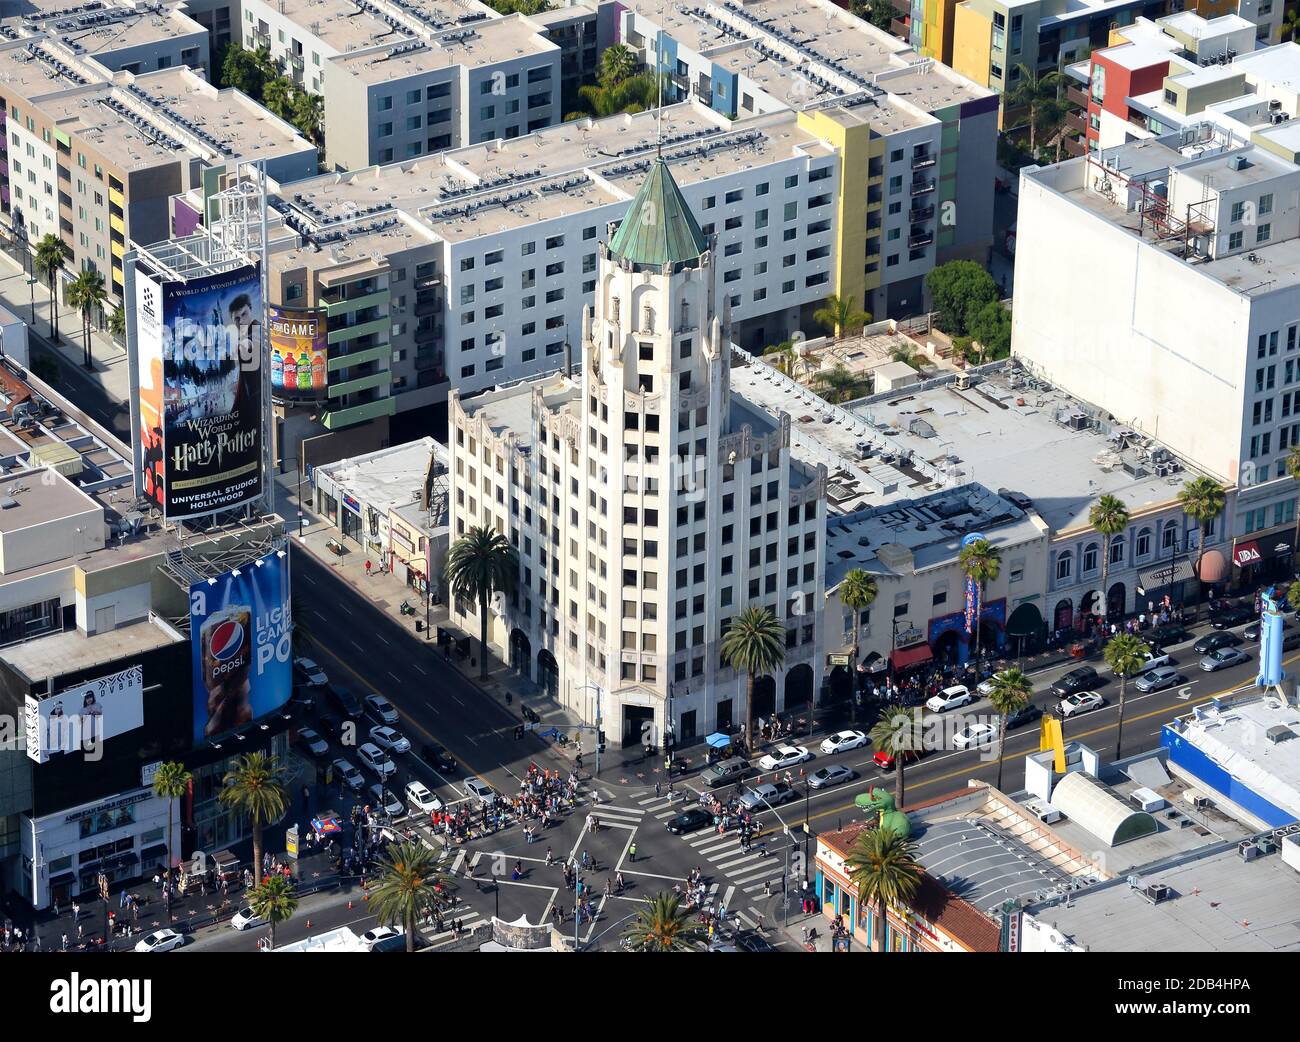 Hollywood First National Bank Building, built in Art Deco architectural style on Hollywood Boulevard and N Highland Avenue intersection. Aerial view. Stock Photo